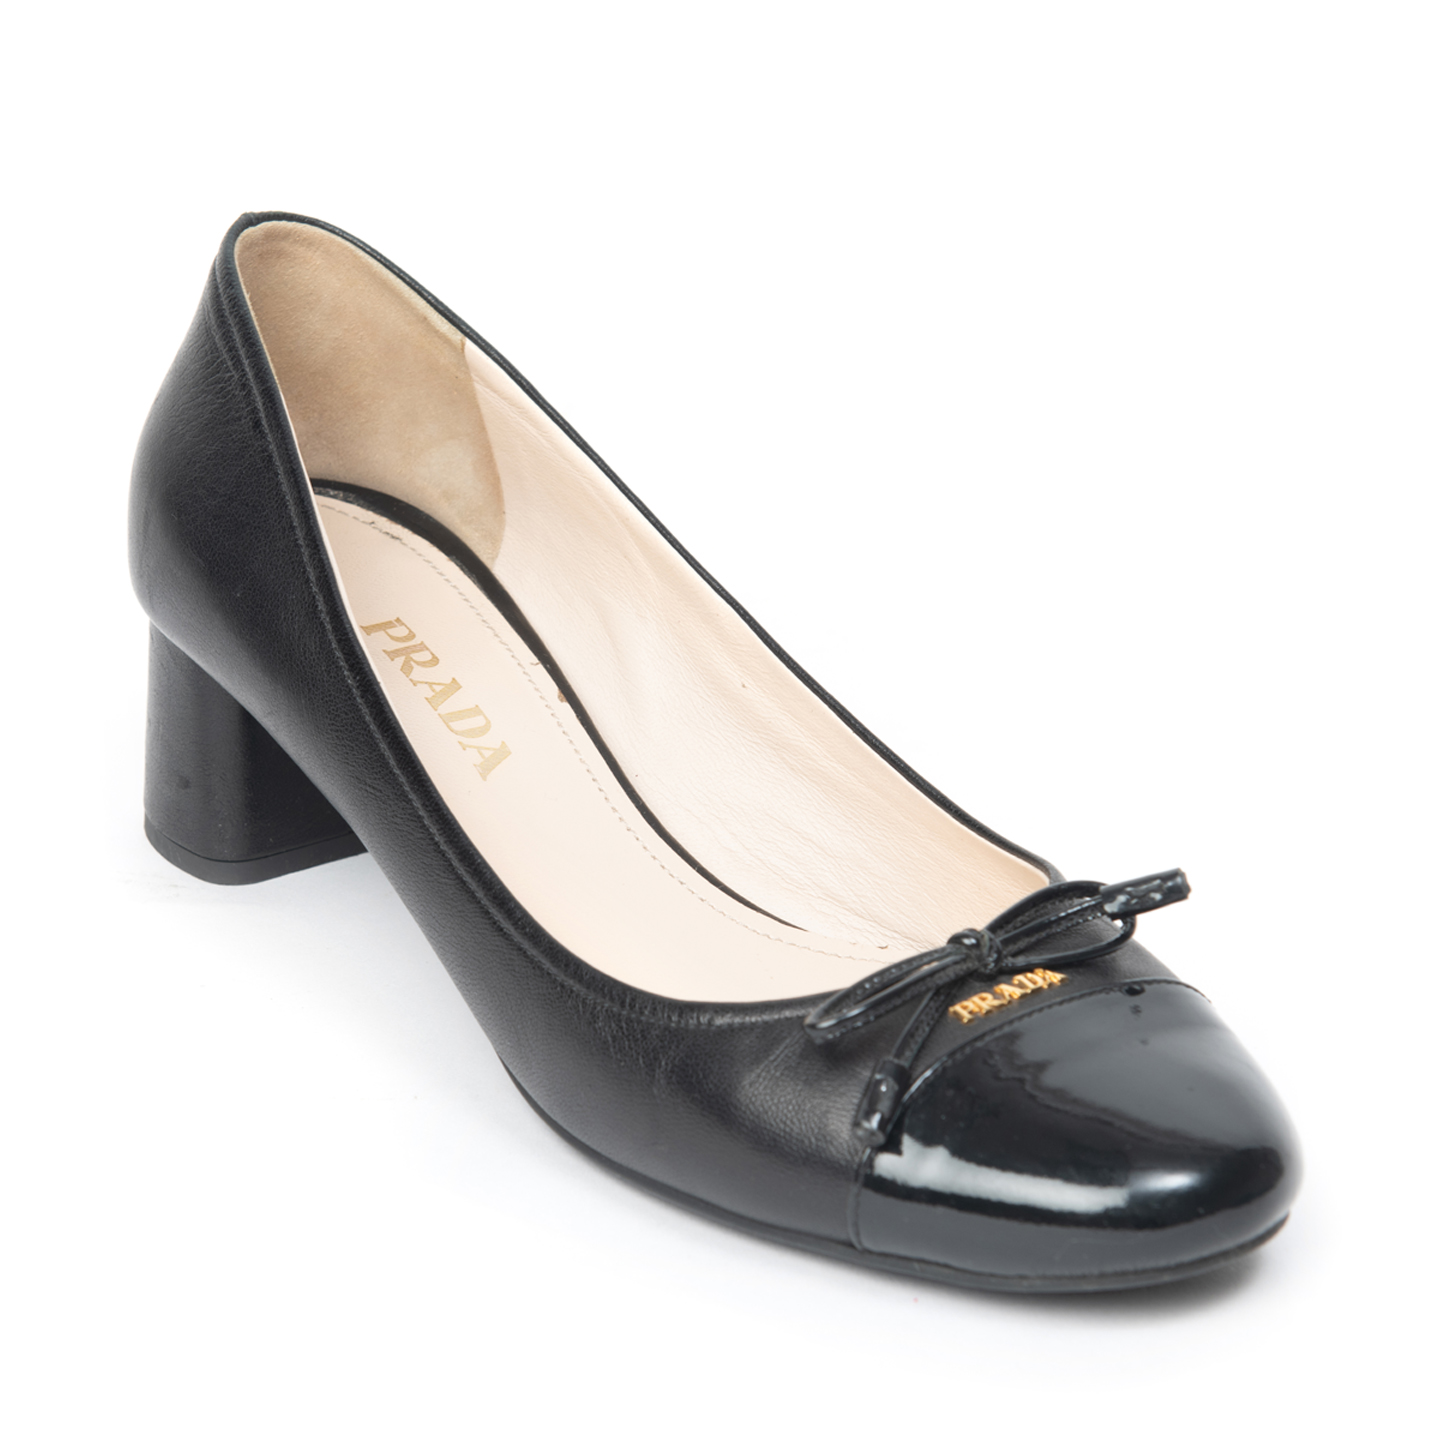 Prada Leather Round-Toe Bow Pumps, Size 39.5 - LabelCentric